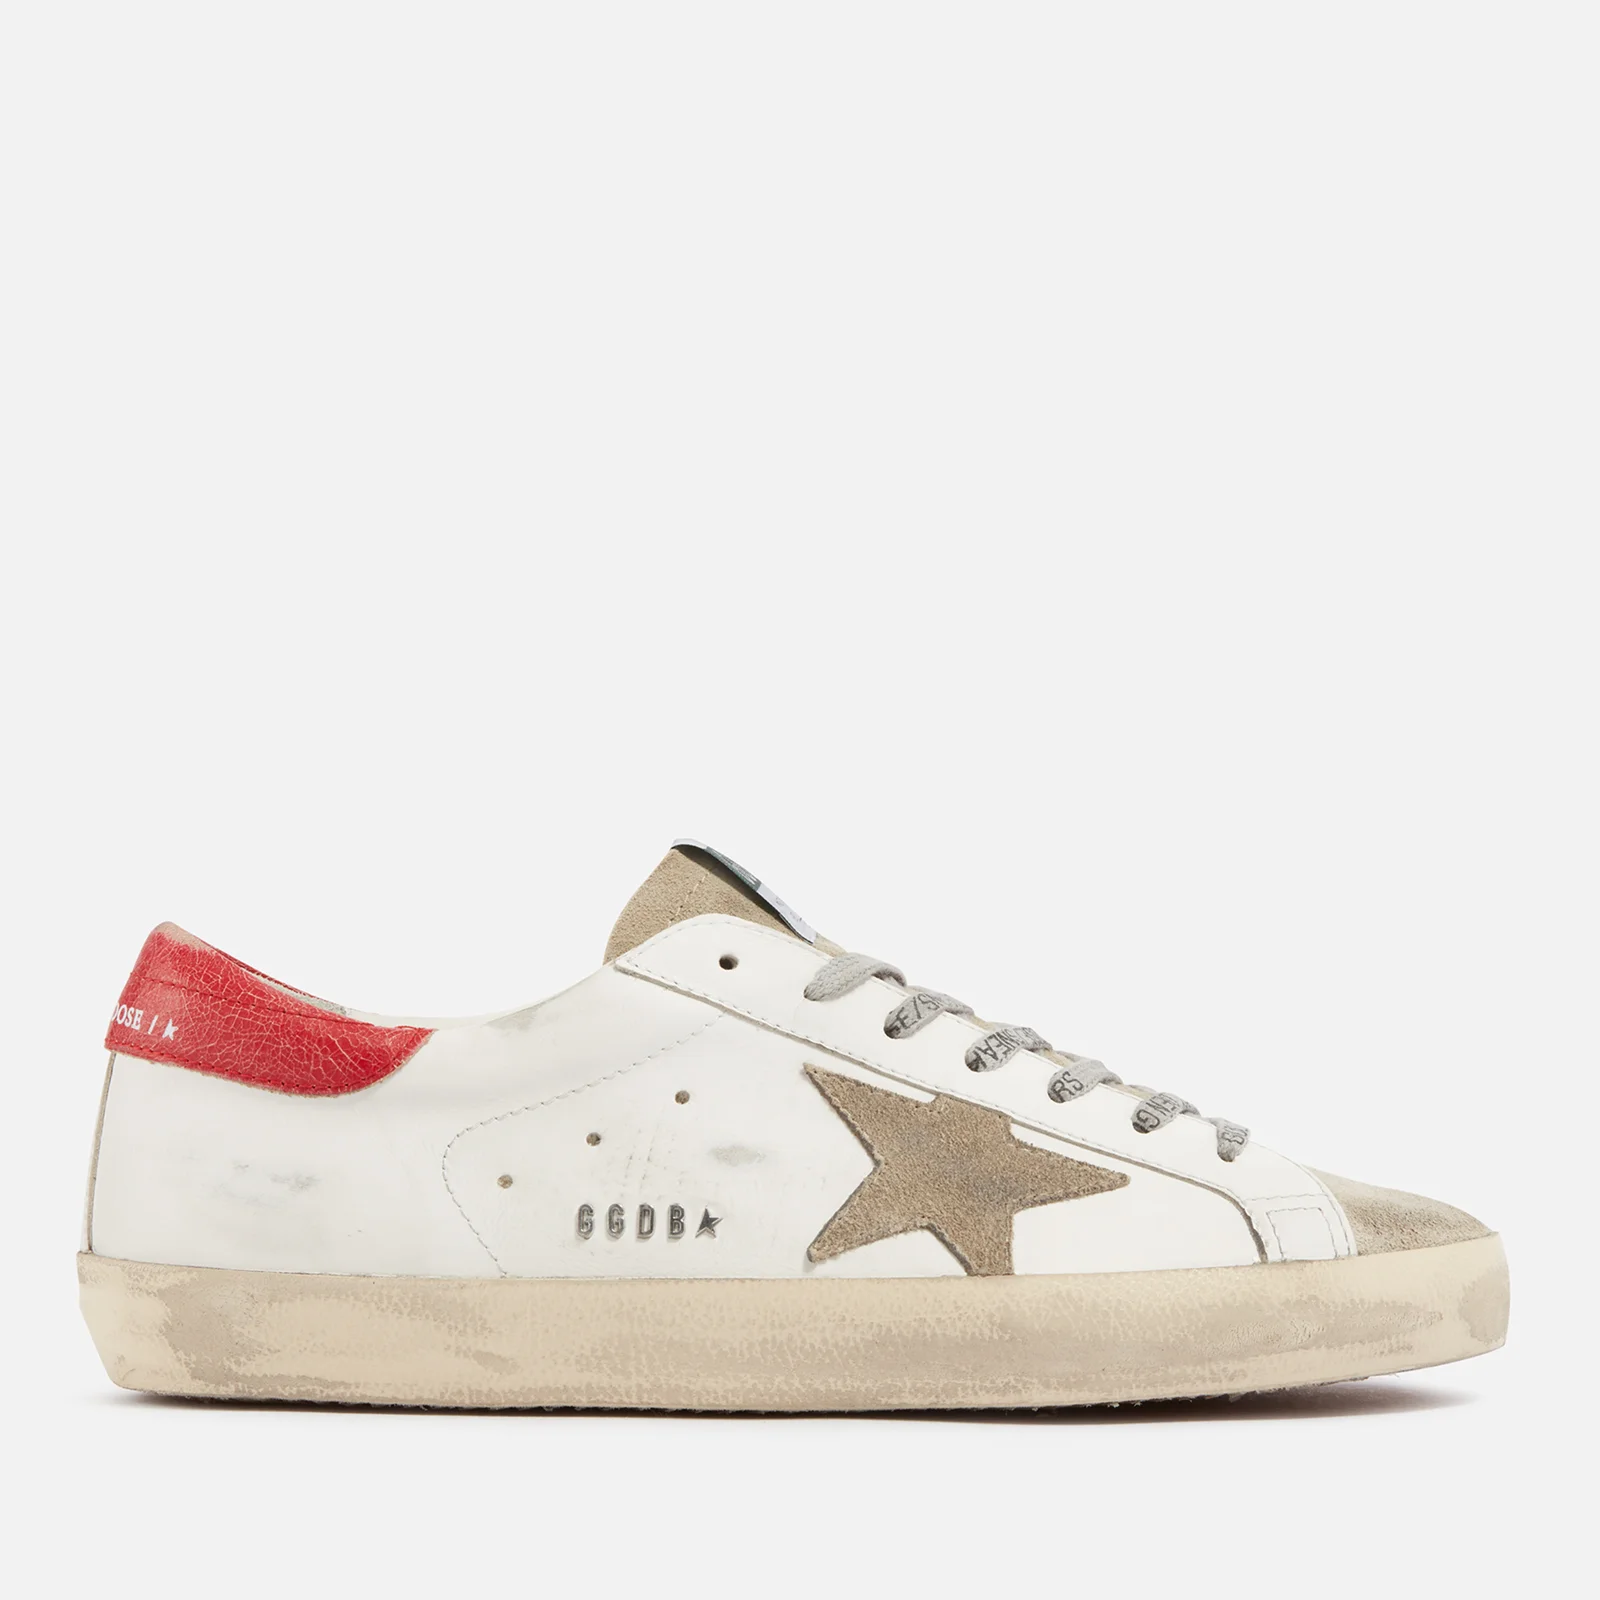 Golden Goose Men's Superstar Leather and Suede Trainers - UK 7 Image 1